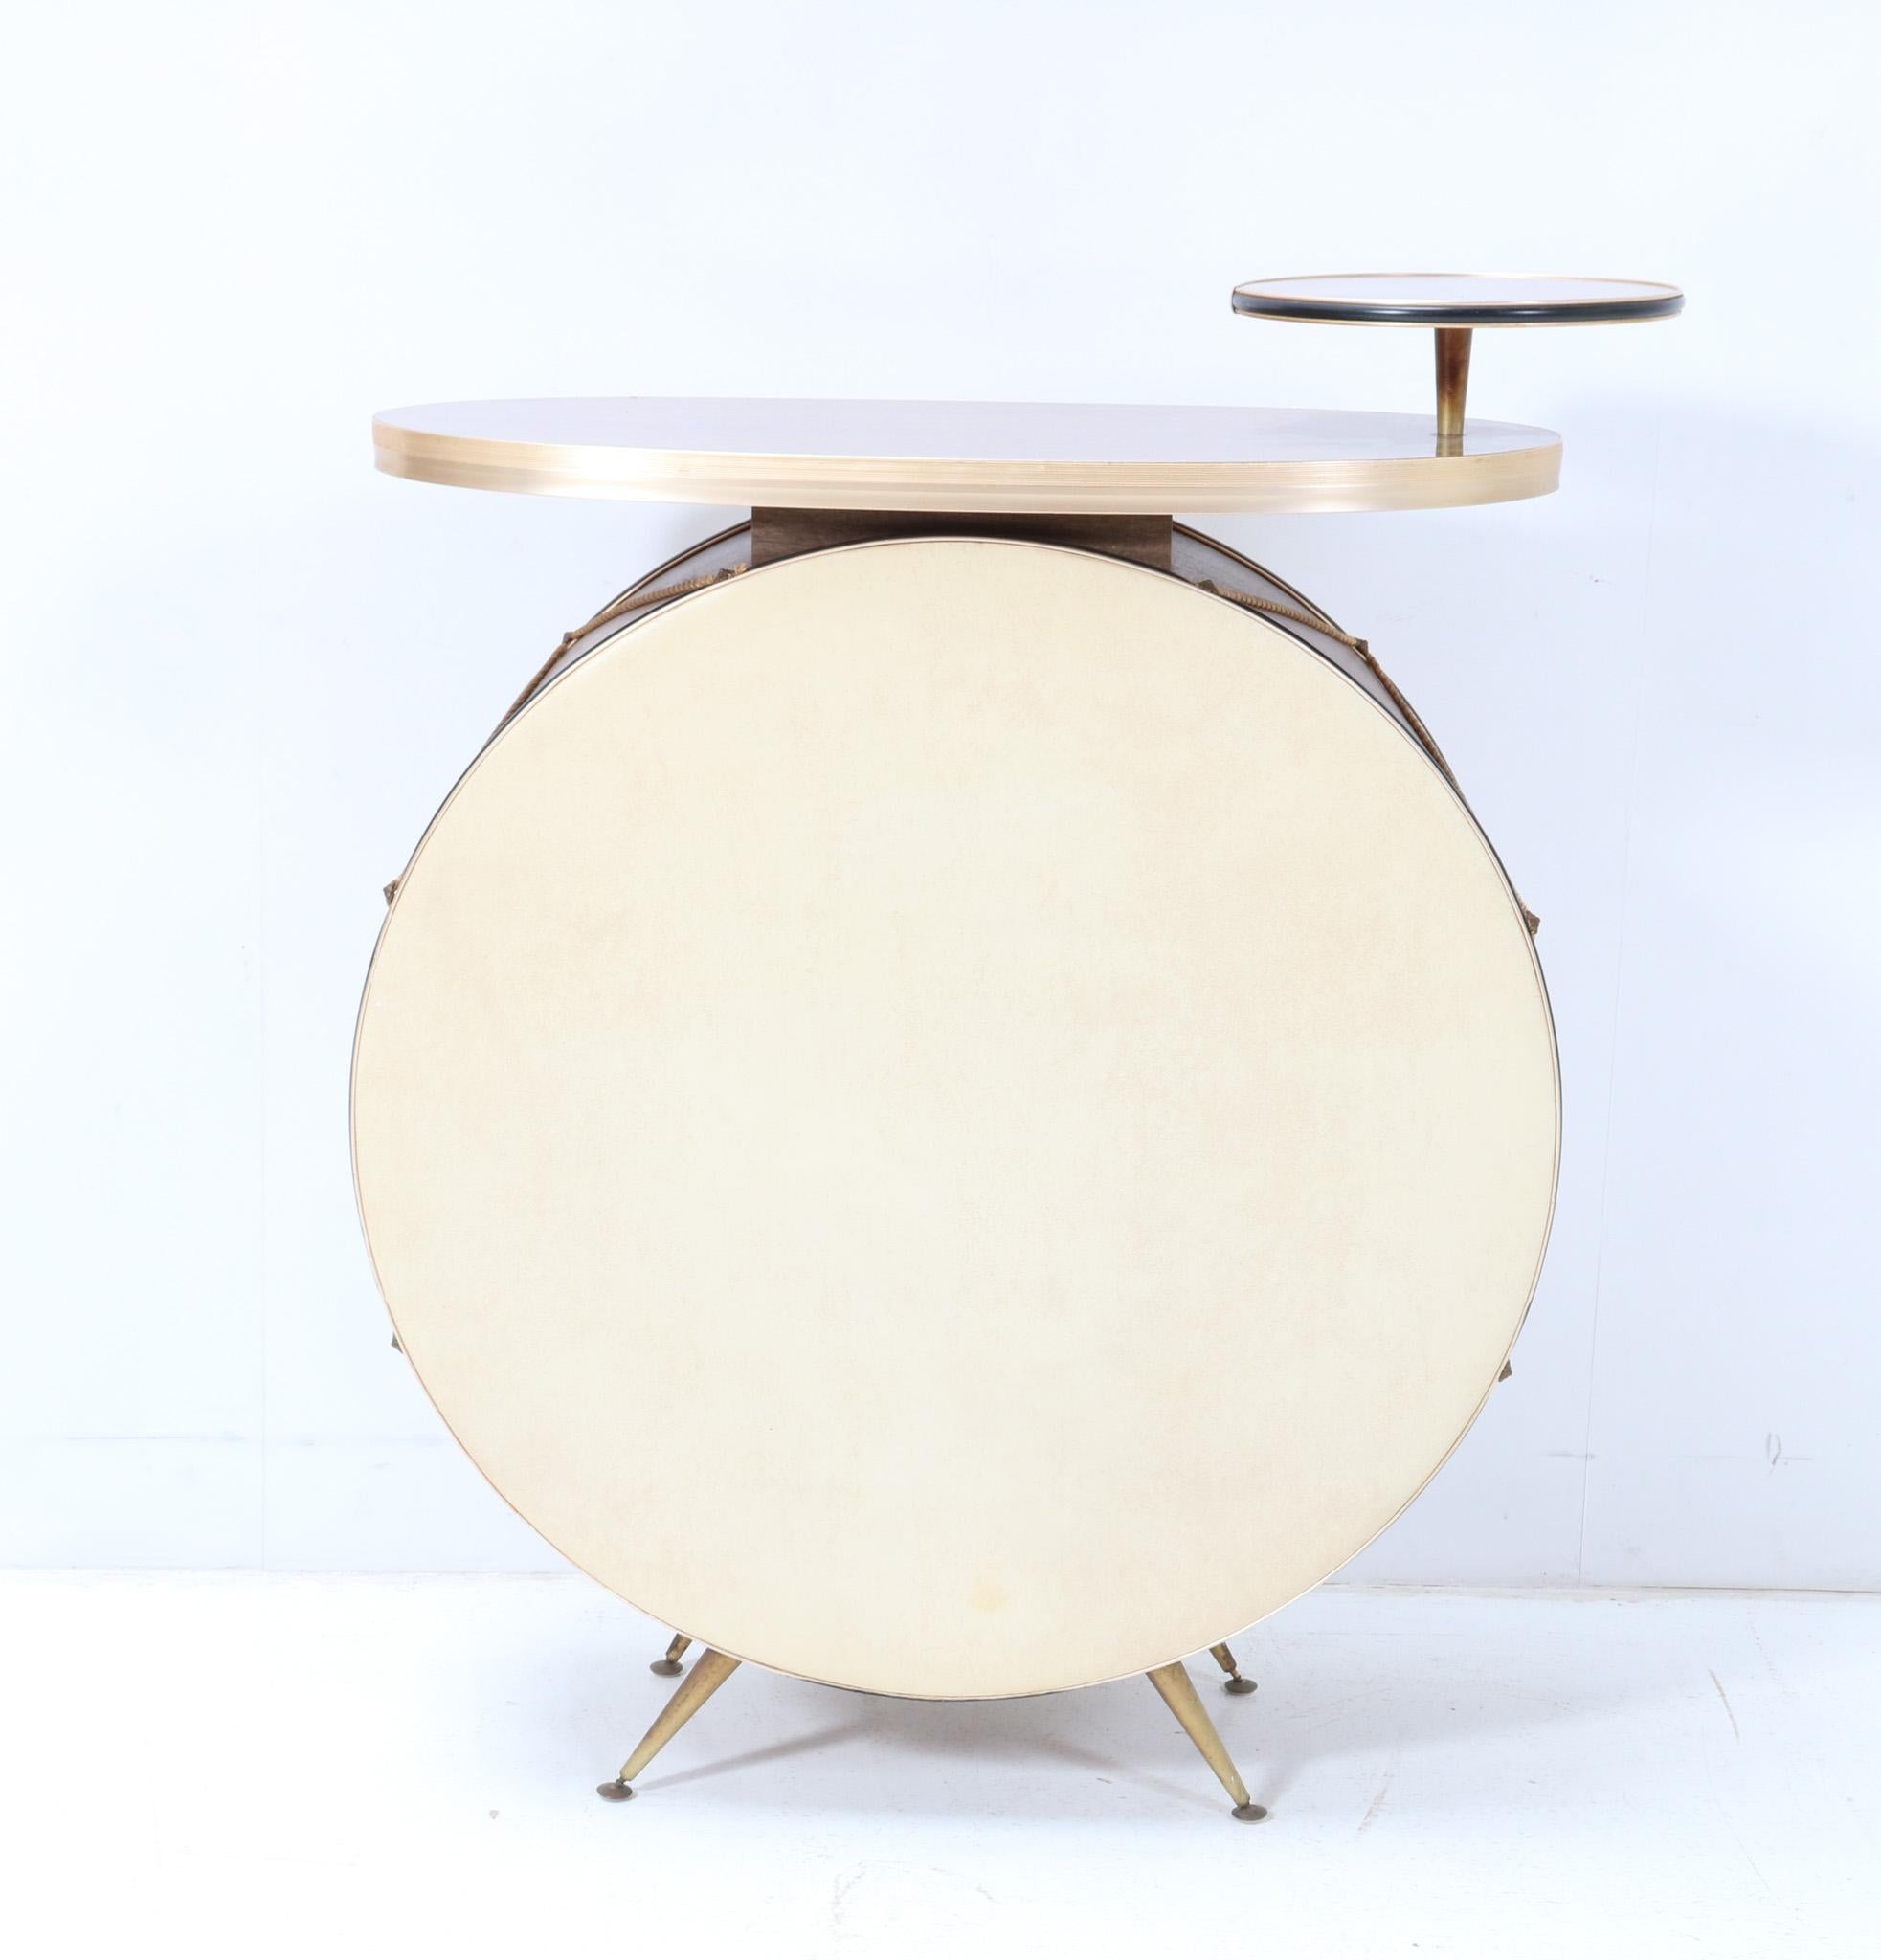 Funky and rare Mid-Century Modern drum dry bar.
Design by Barget Built UK.
Striking British design from the 1960s.
Laminated plywood drum shaped base with original laminated plywood tops.
On original gilt metal feet.
Marked with original